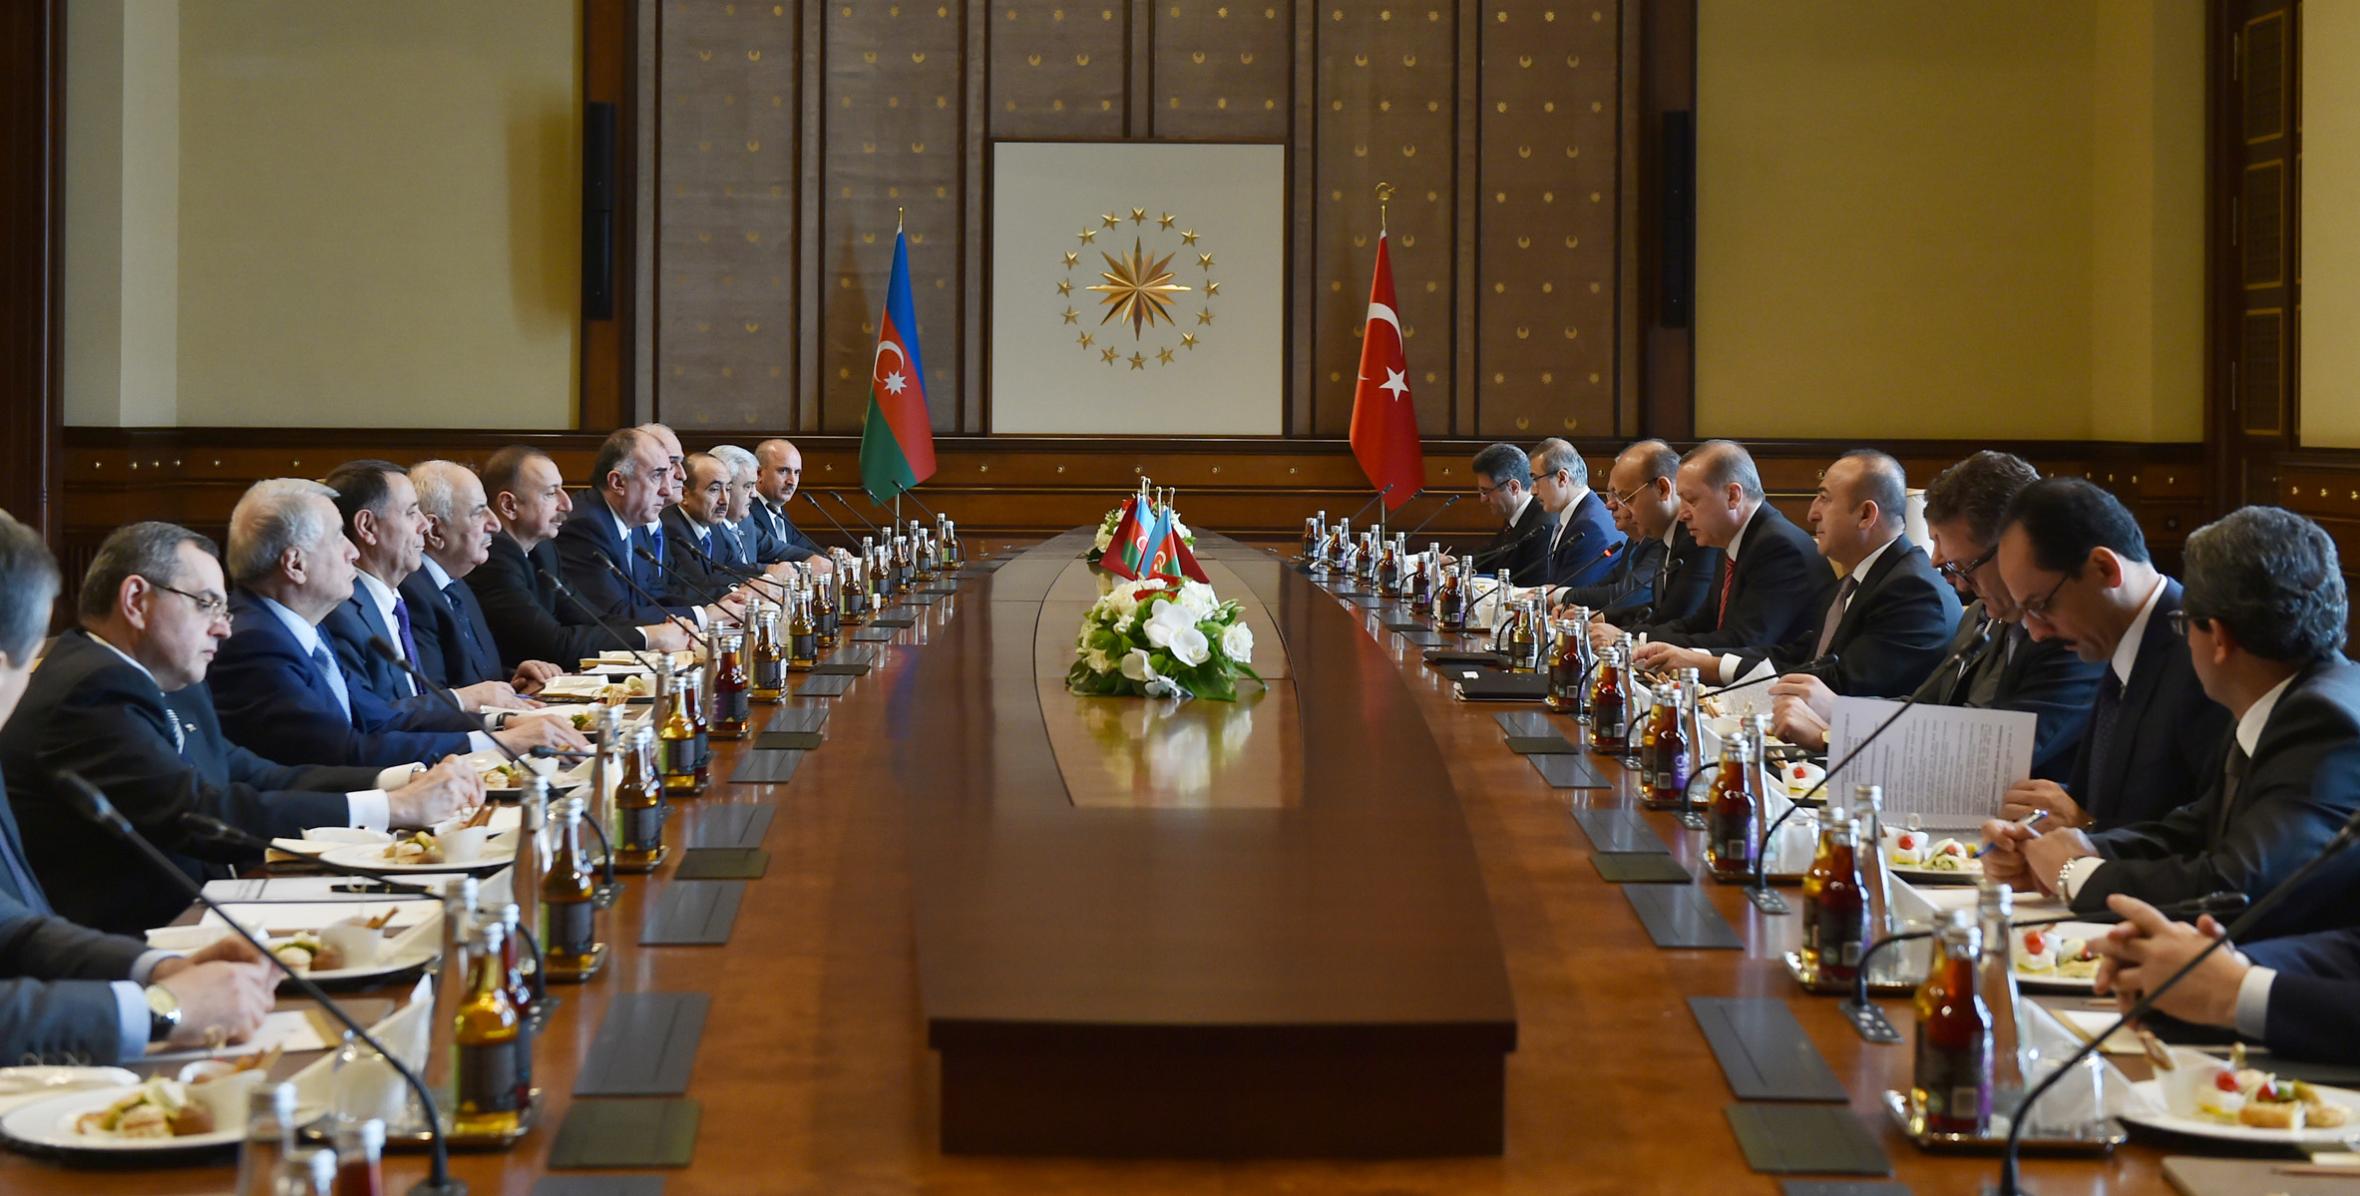 5th session of Azerbaijan-Turkey High-Level Strategic Cooperation Council was held